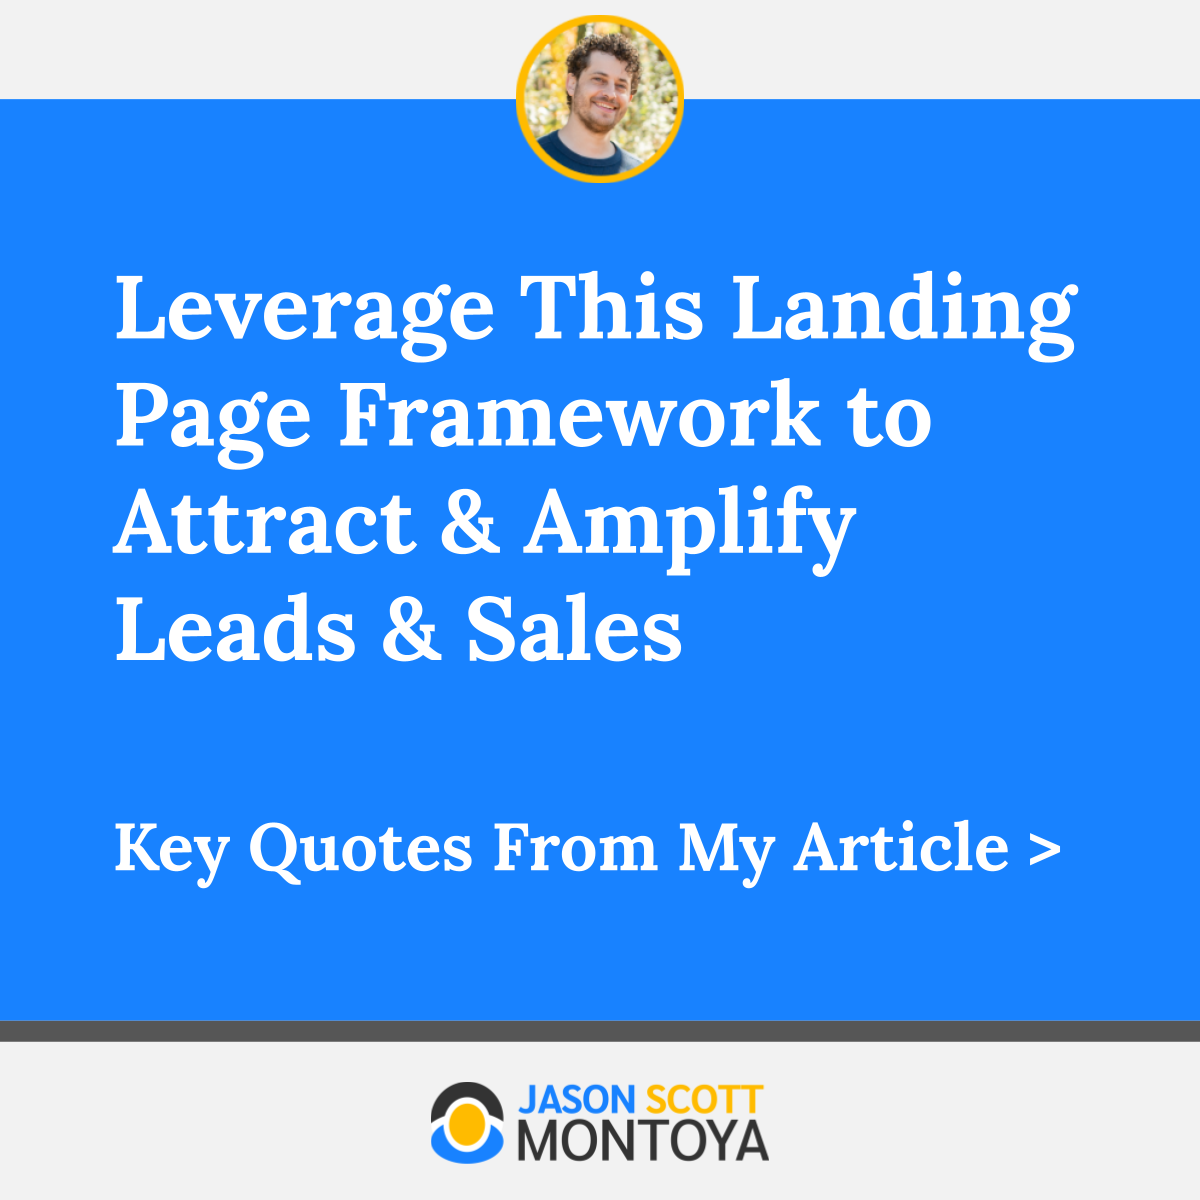 Leverage This Landing Page Framework to Attract & Amplify Leads & Sales  Key Quotes From My Article >